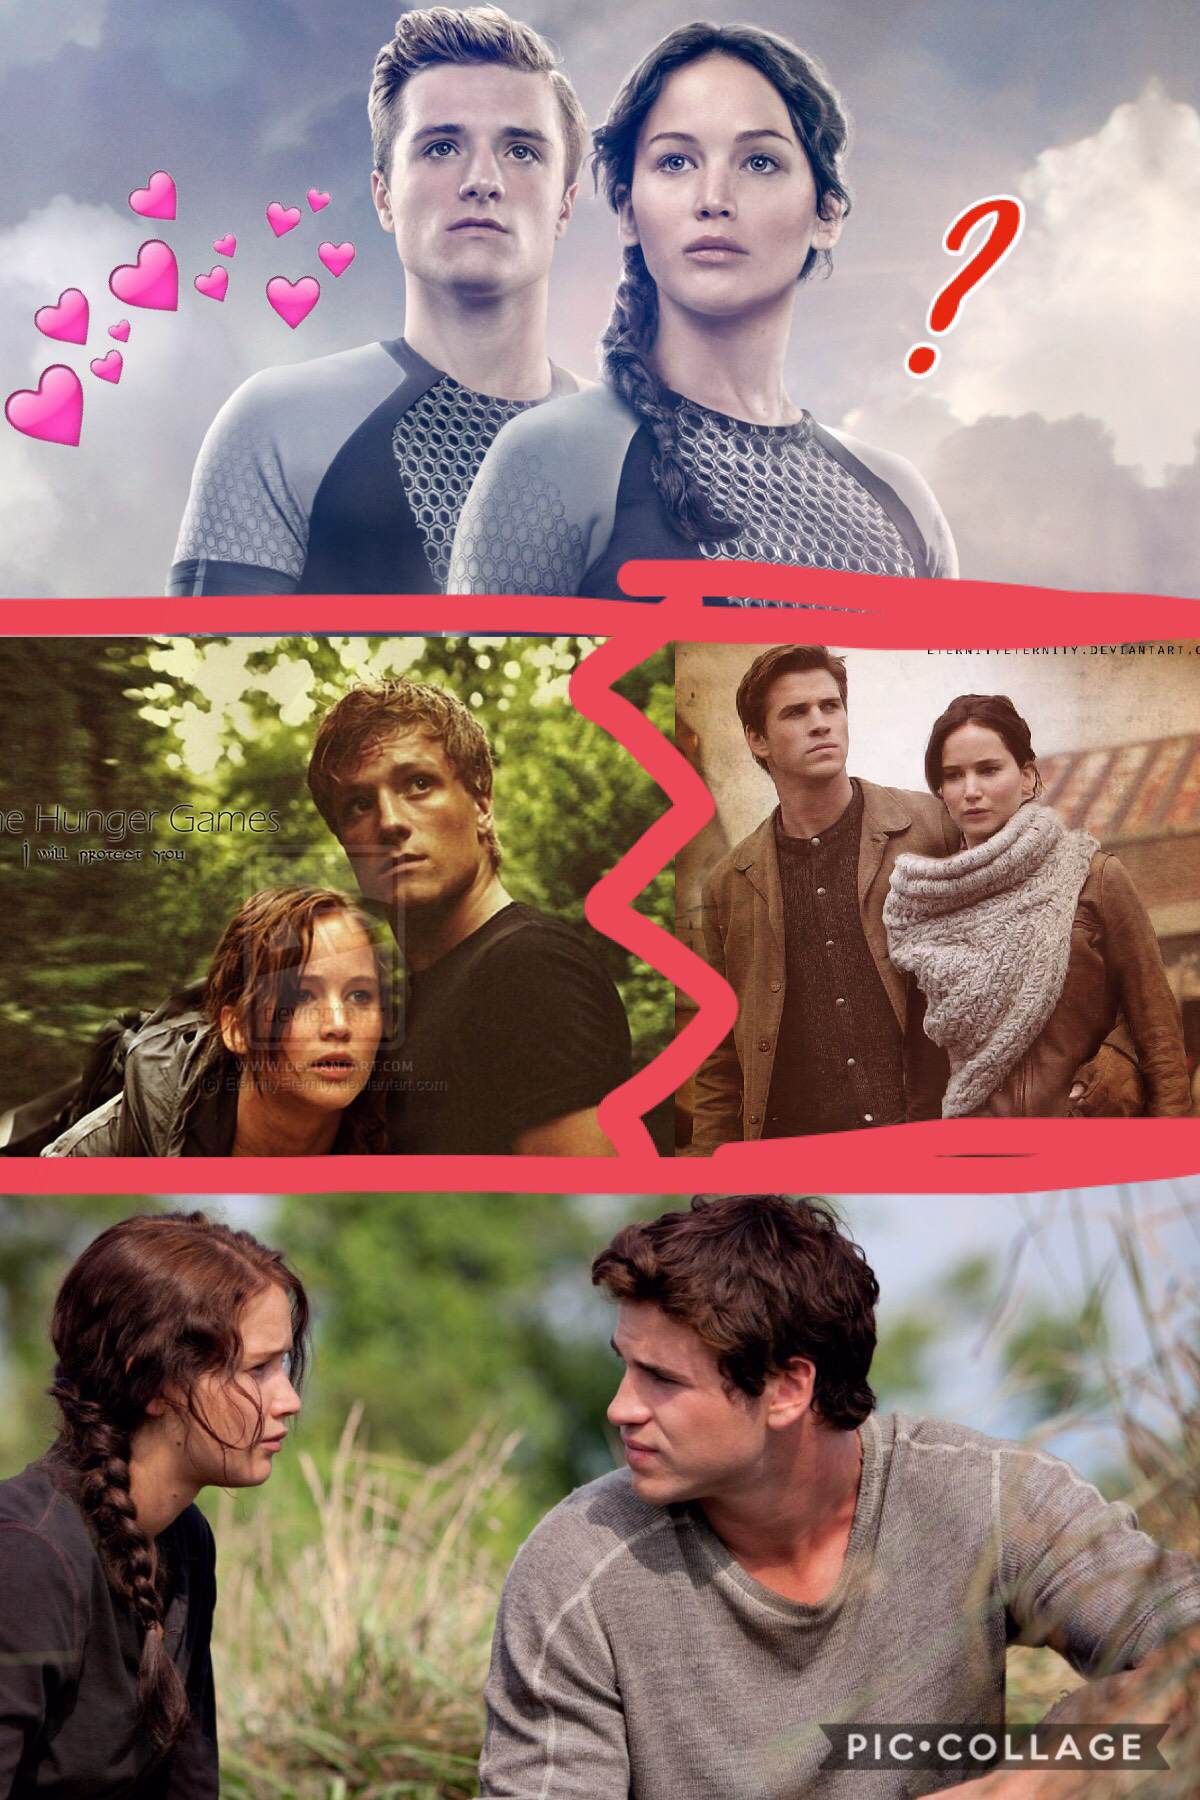 Like this collage if you ❤️ the Hunger Games 